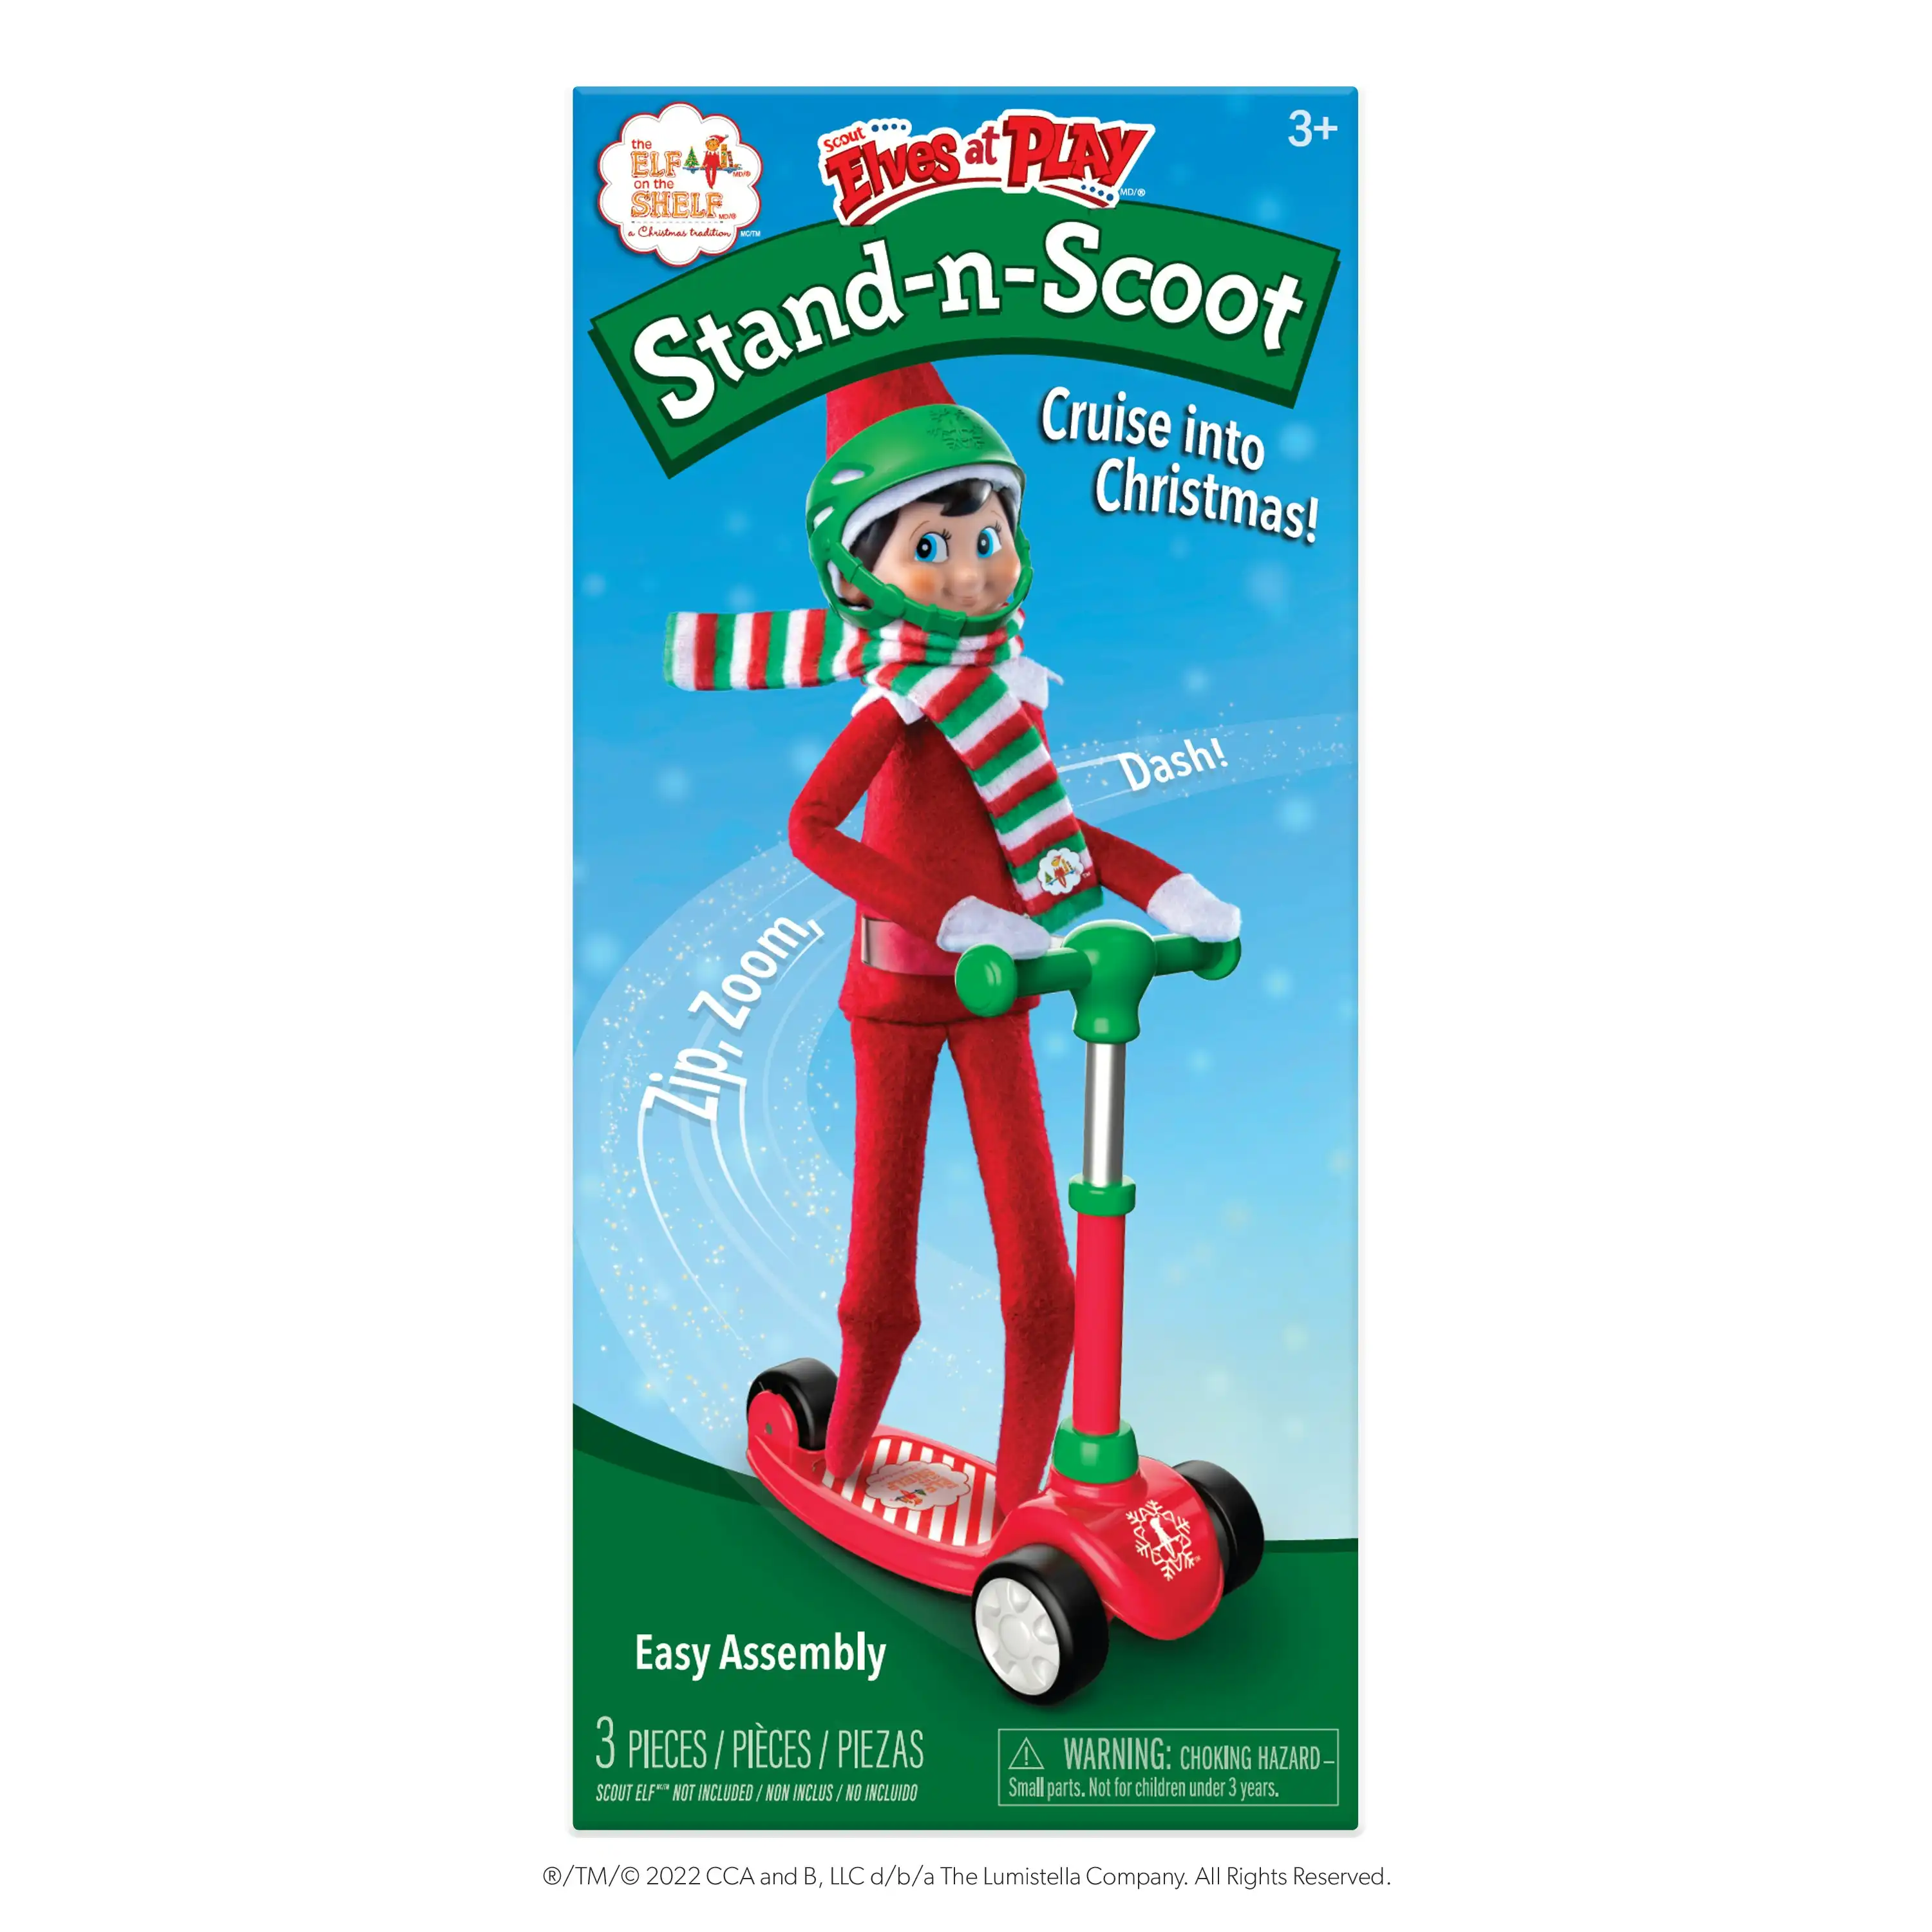 Scout Elves at Play Stand and Scoot